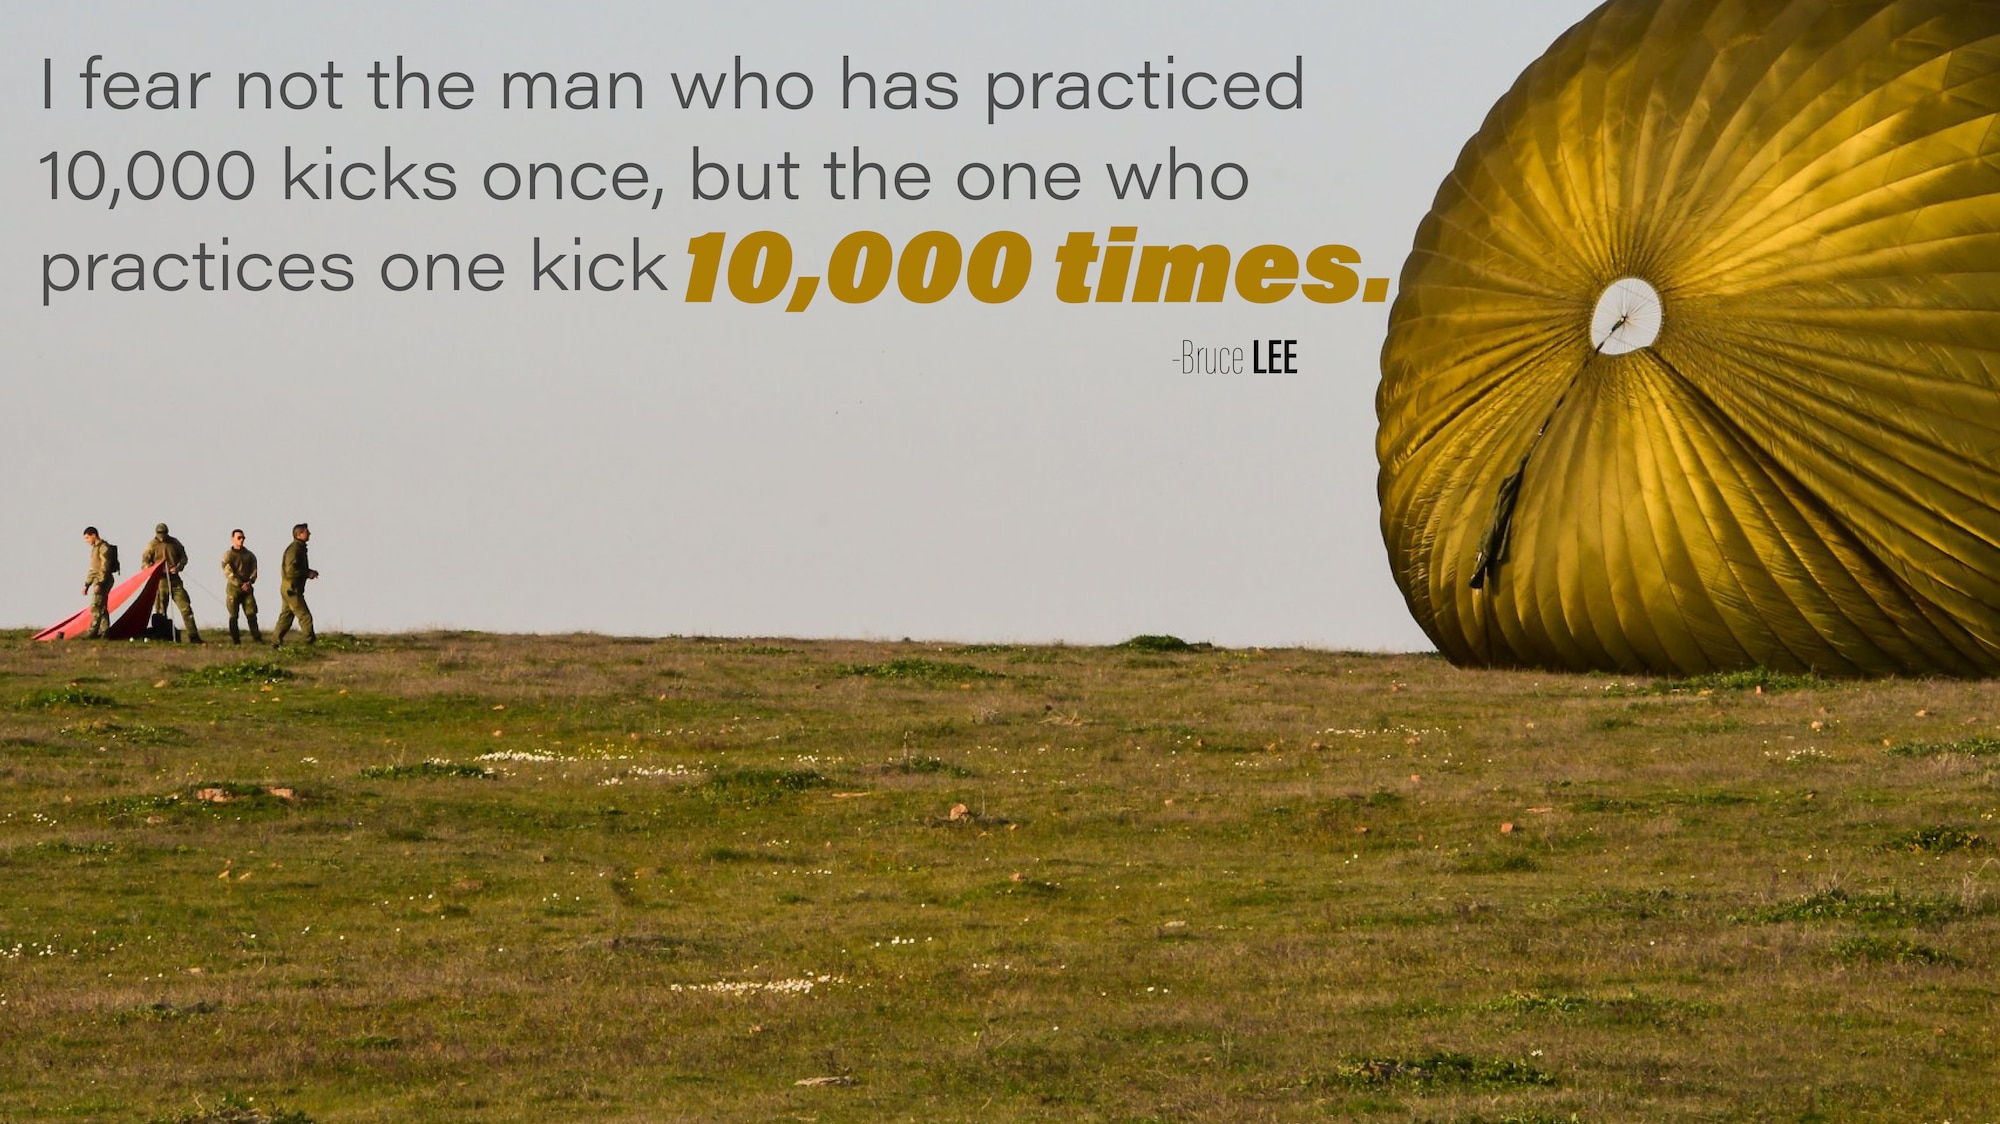 This week's Monday Motivation is from Bruce Lee:

"I fear not the man who has practiced 10,000 kicks, but the one who practices one kick 10,000 times." 

(U.S. Air Force graphic/Tech. Sgt. Andrew Park)